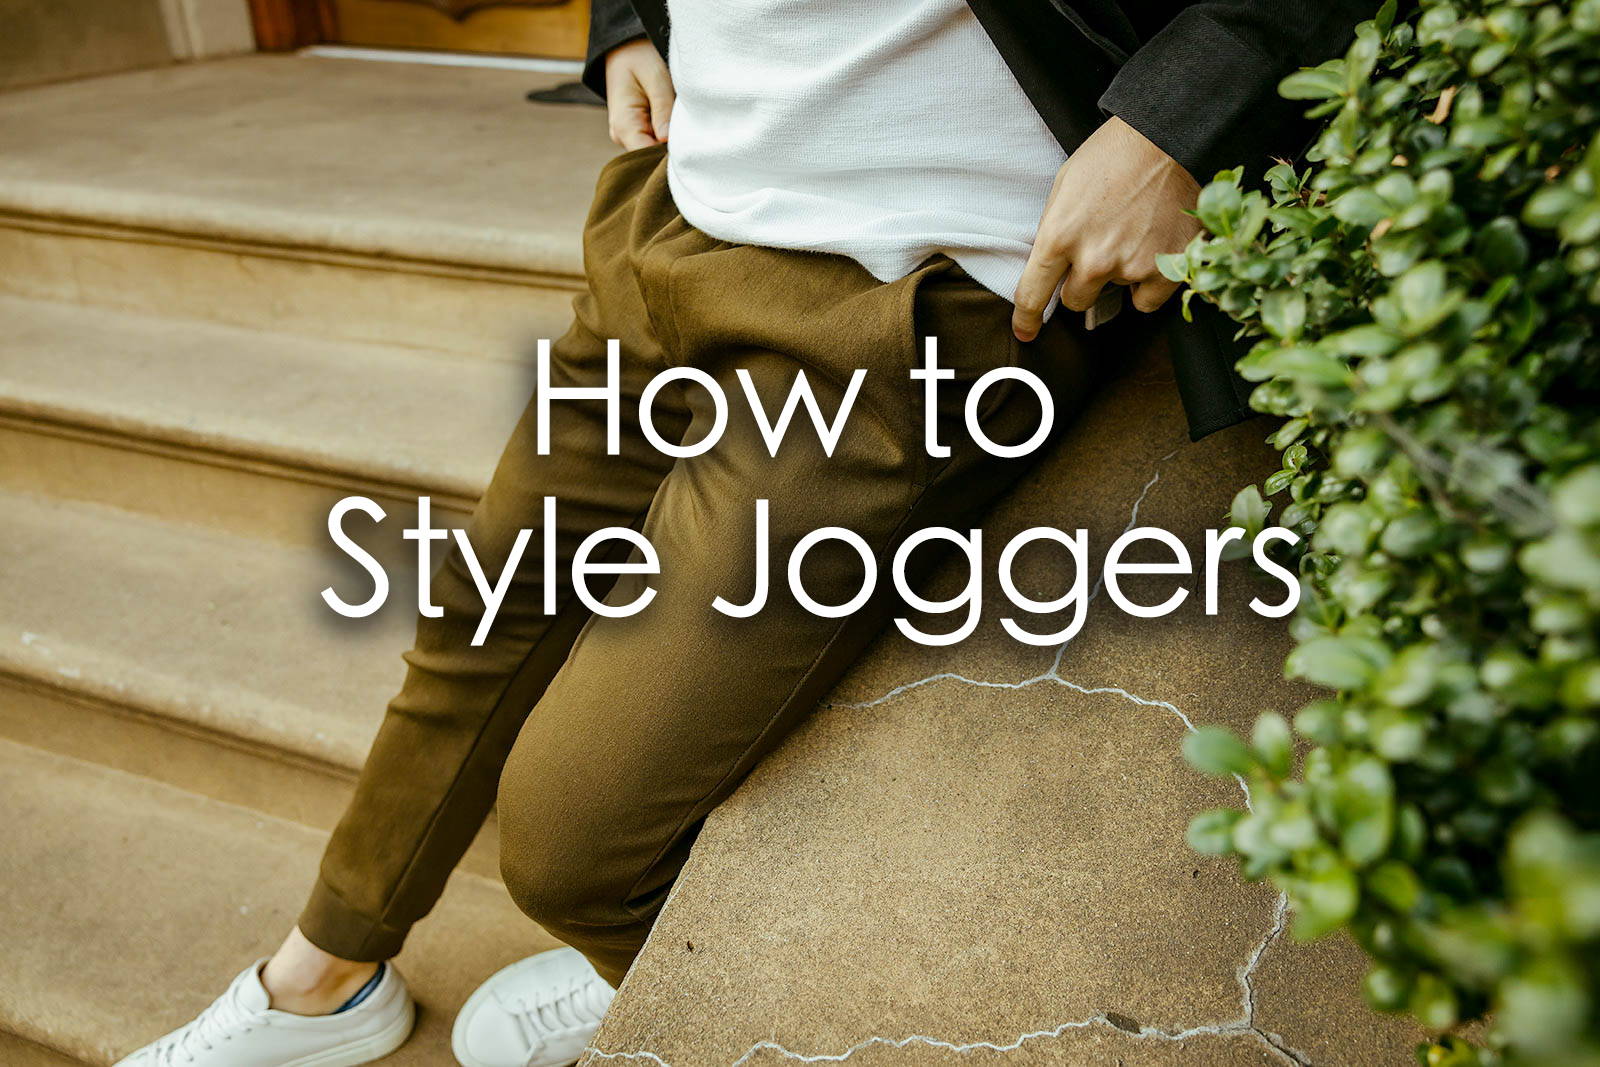 How to Style Joggers So They Don’t Look like At-Home Sweats